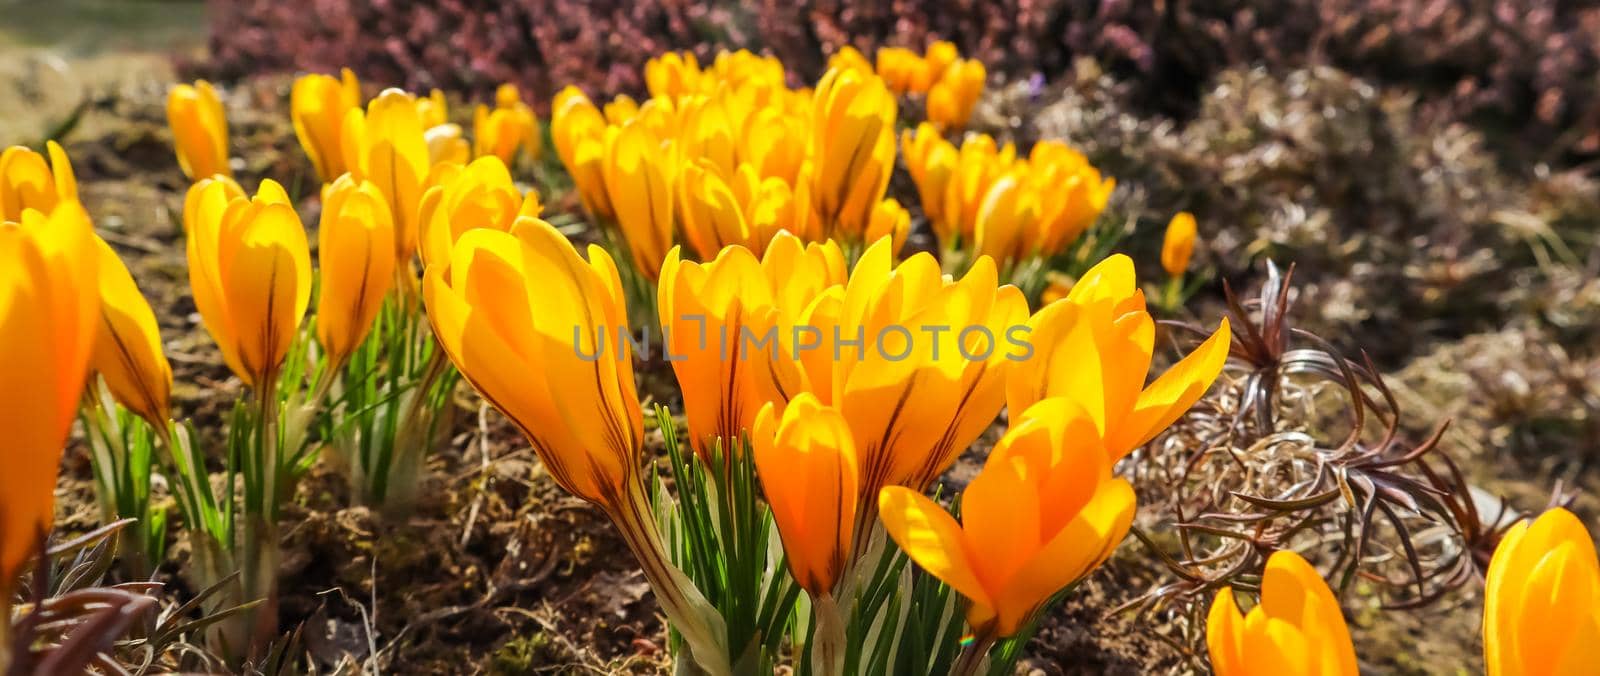 Spring in my garden. Blooming yellow crocus flowers on sunny day by Olayola